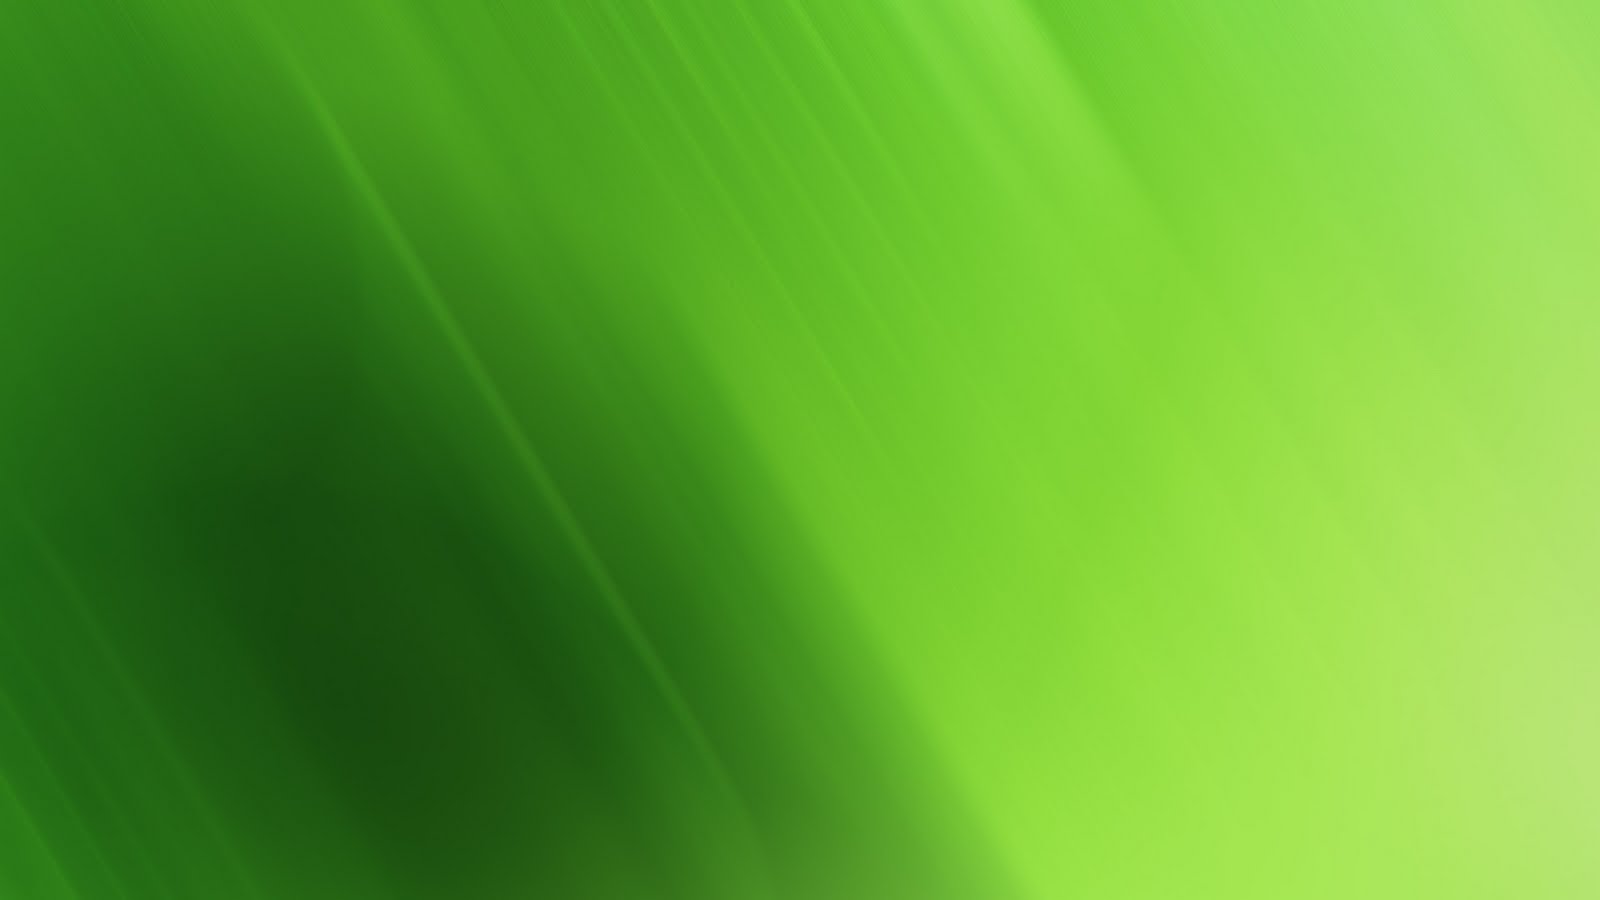 Backgrounds For Presentations Green Swirl Clipart